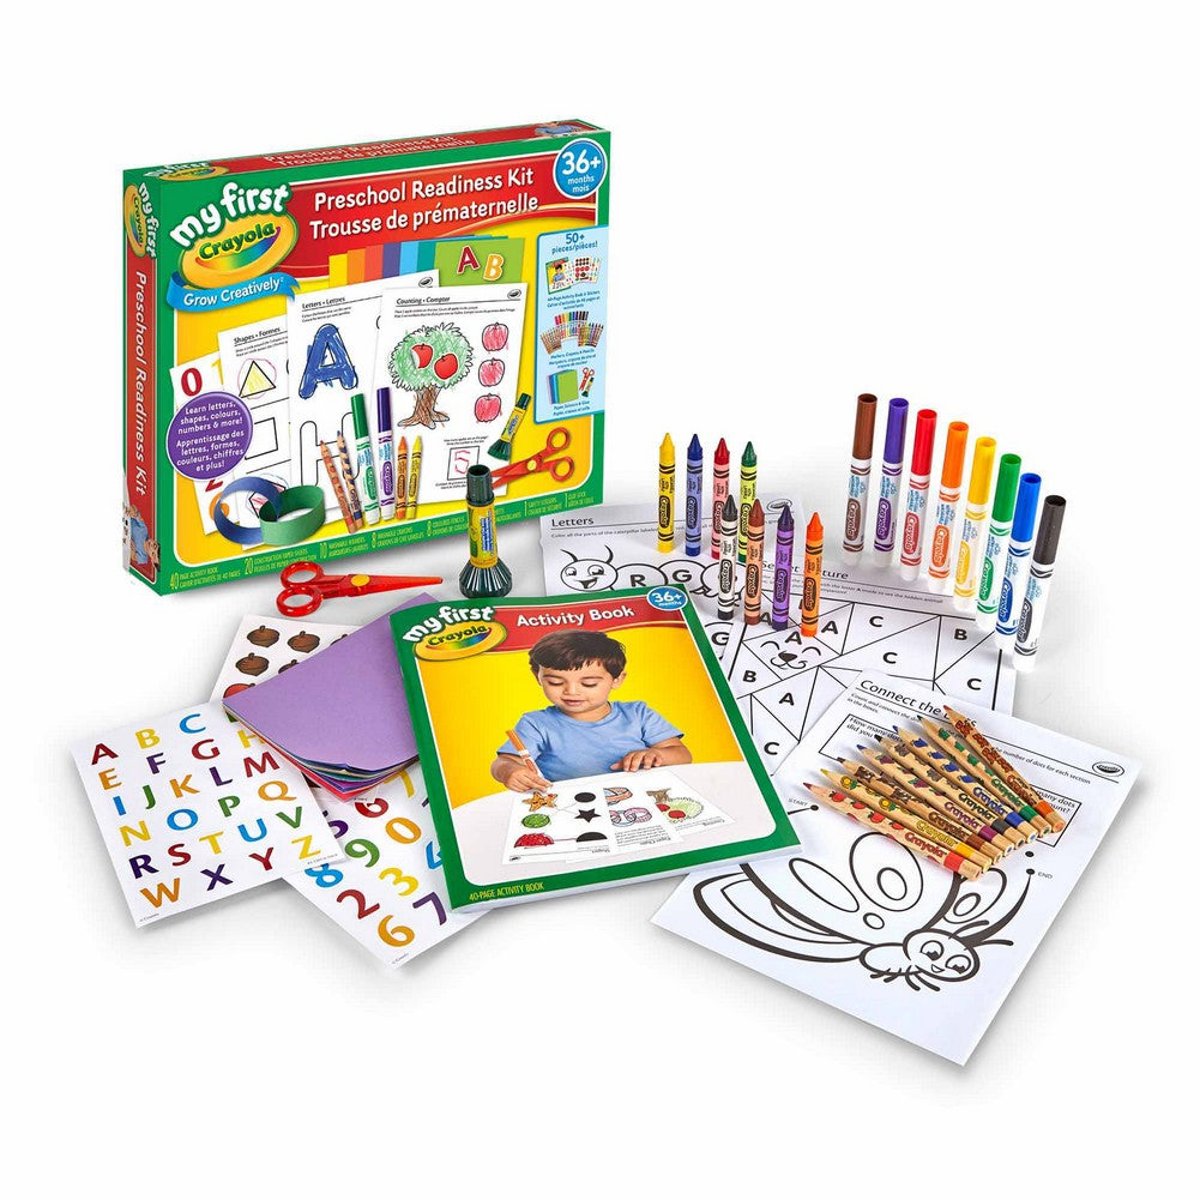 Kids CRAYOLA Colored pencil, crayon and marker set 74-Piece Color Gift Set  -NEW